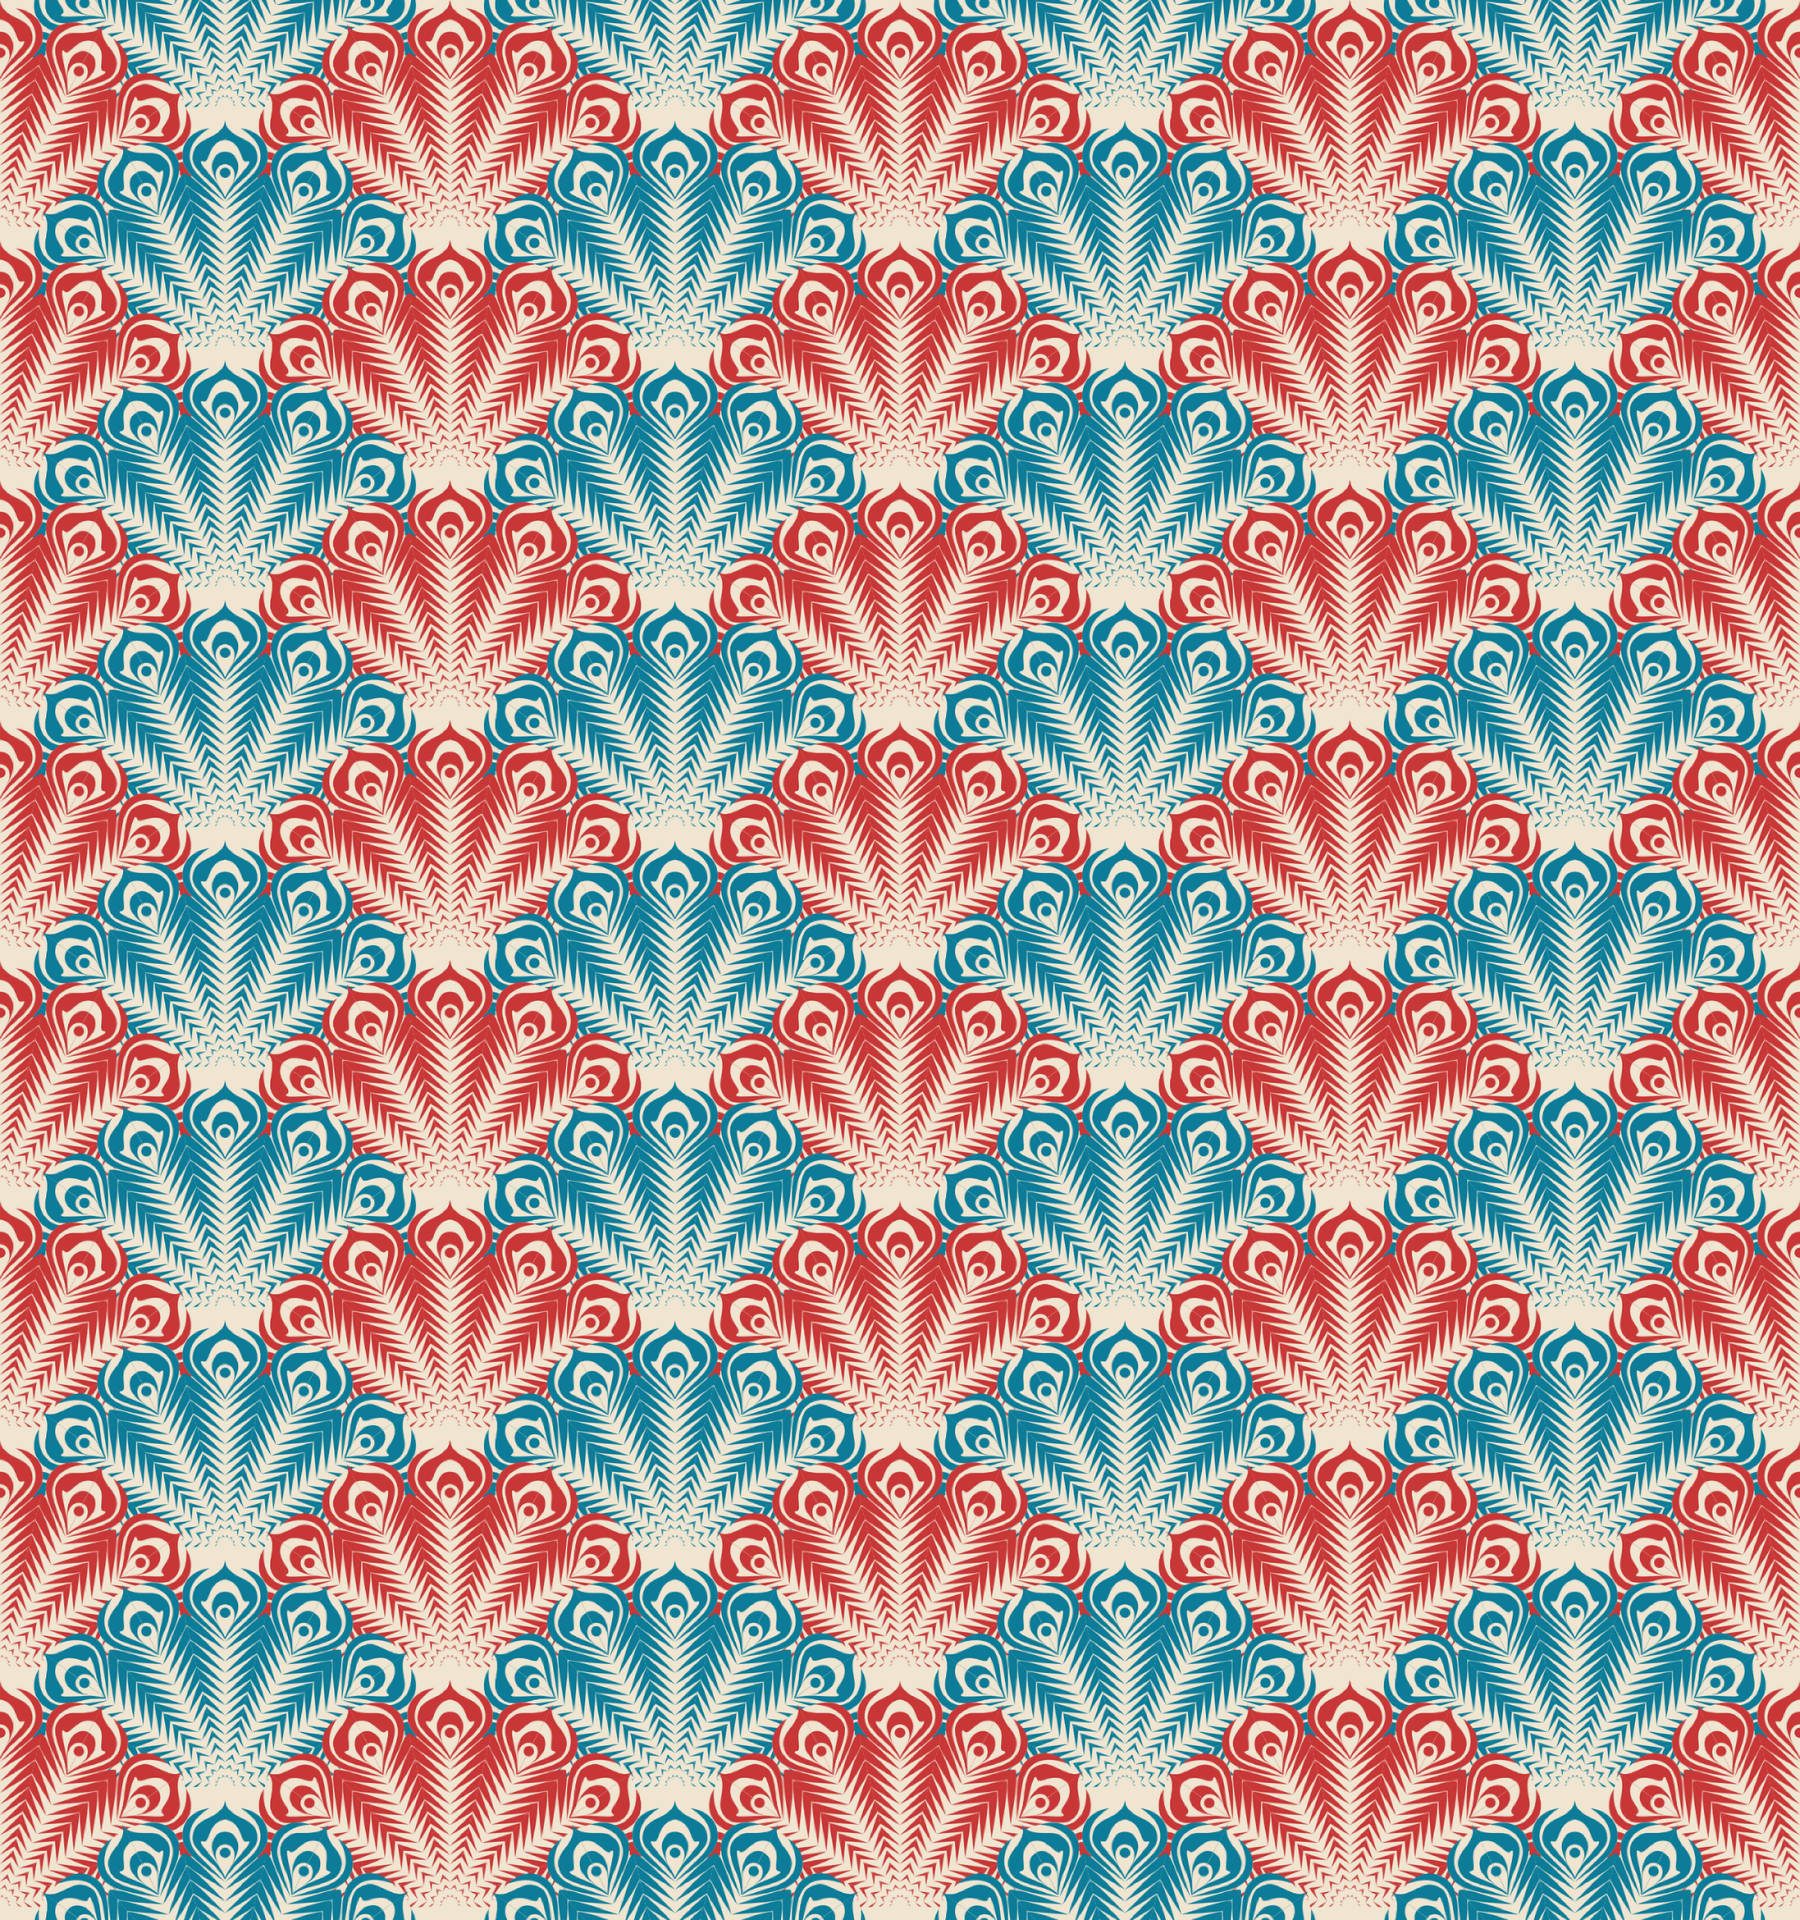 Mesmerizing Display of a Retro Styled Peacock Wallpaper